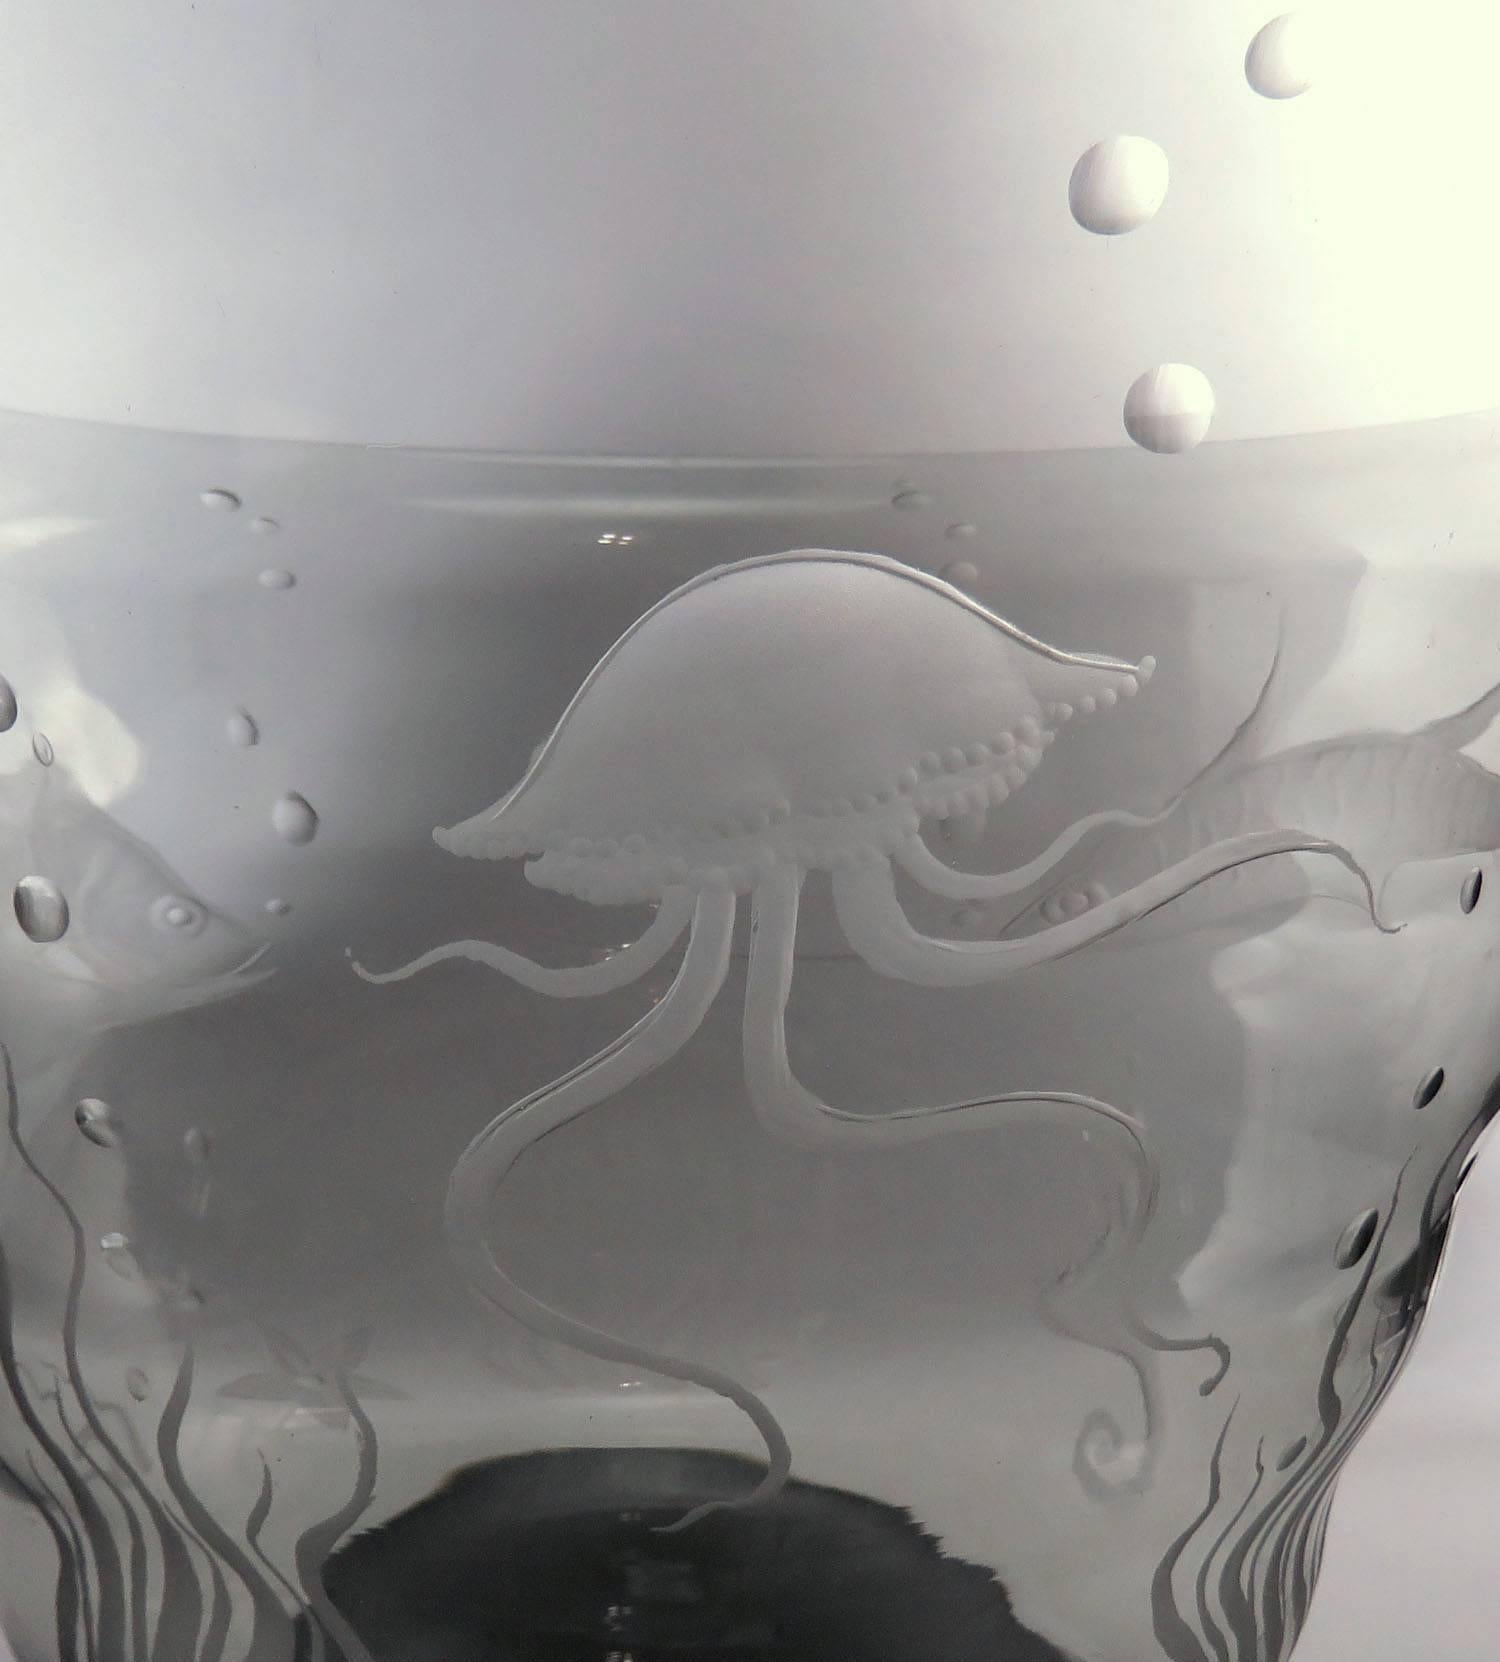 Rare and large handblown Murano glass centerpiece bowl engraved with images of various undersea creatures. Signed Gino Francesconi, and dated 1939. Along with Guglielmo Barbini and Giuseppe D'Alpaos, Francesconi was a founding member of S.A.L.I.R.